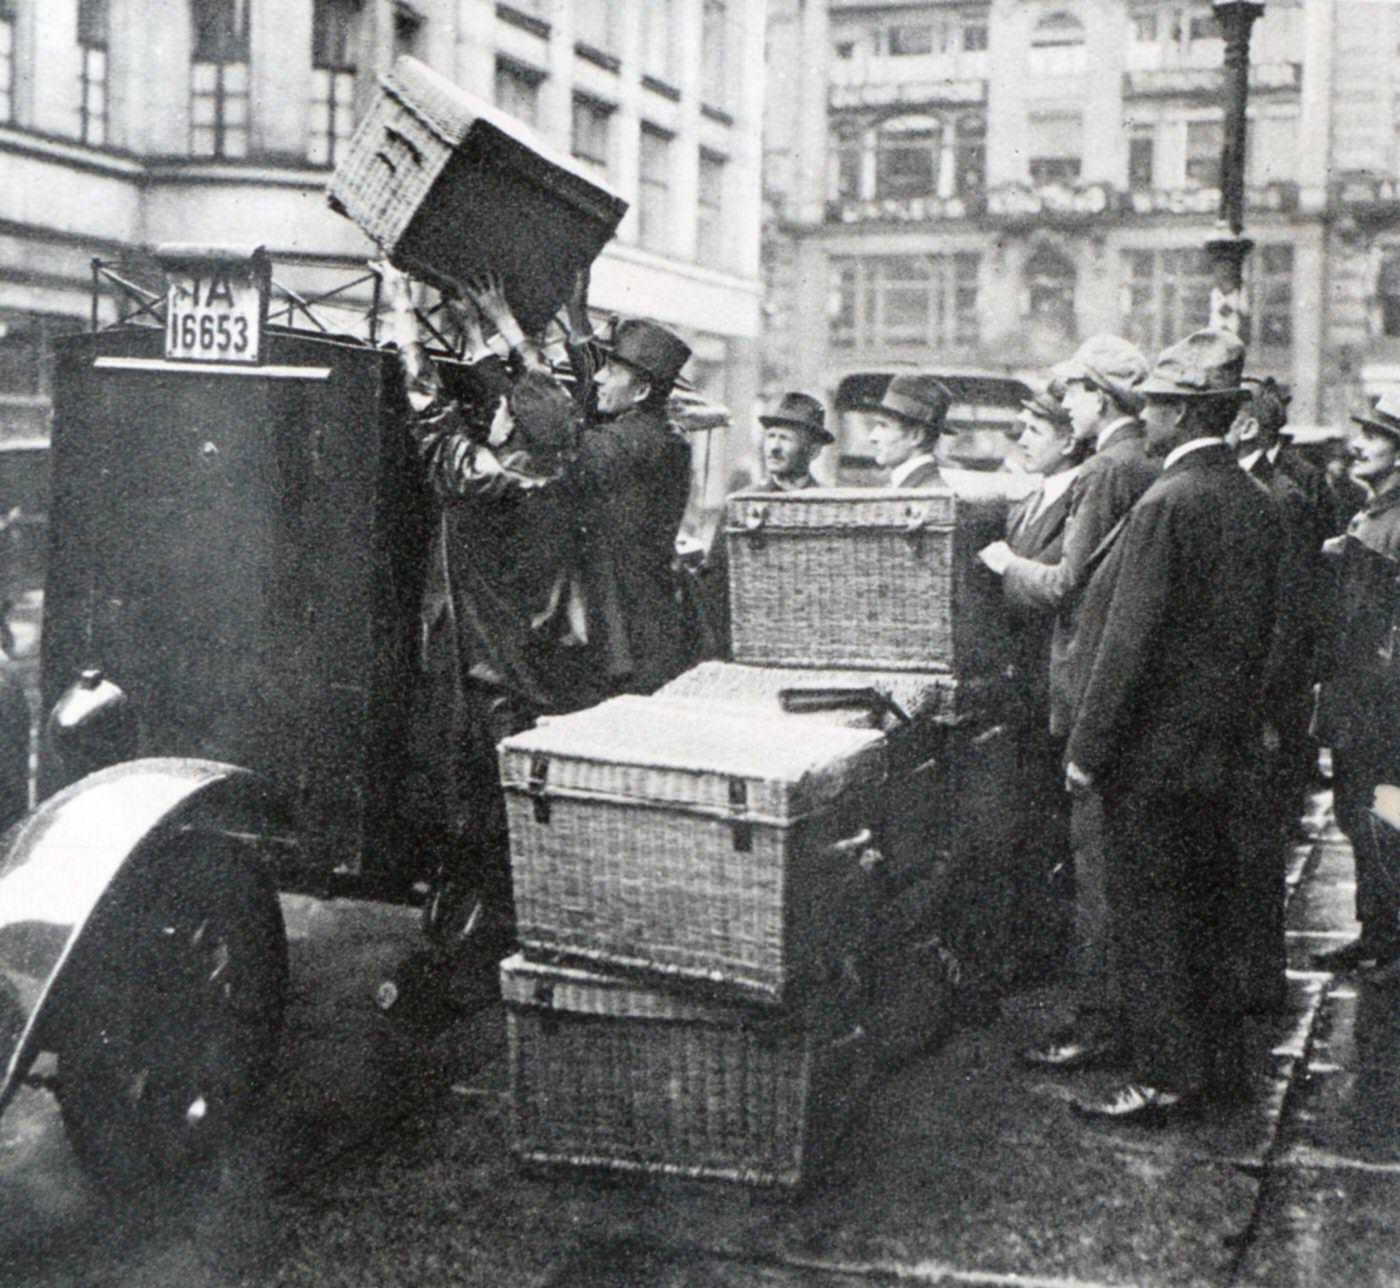 Basket loads of money loaded on a vehicle during Weimar German hyperinflation, 1923.